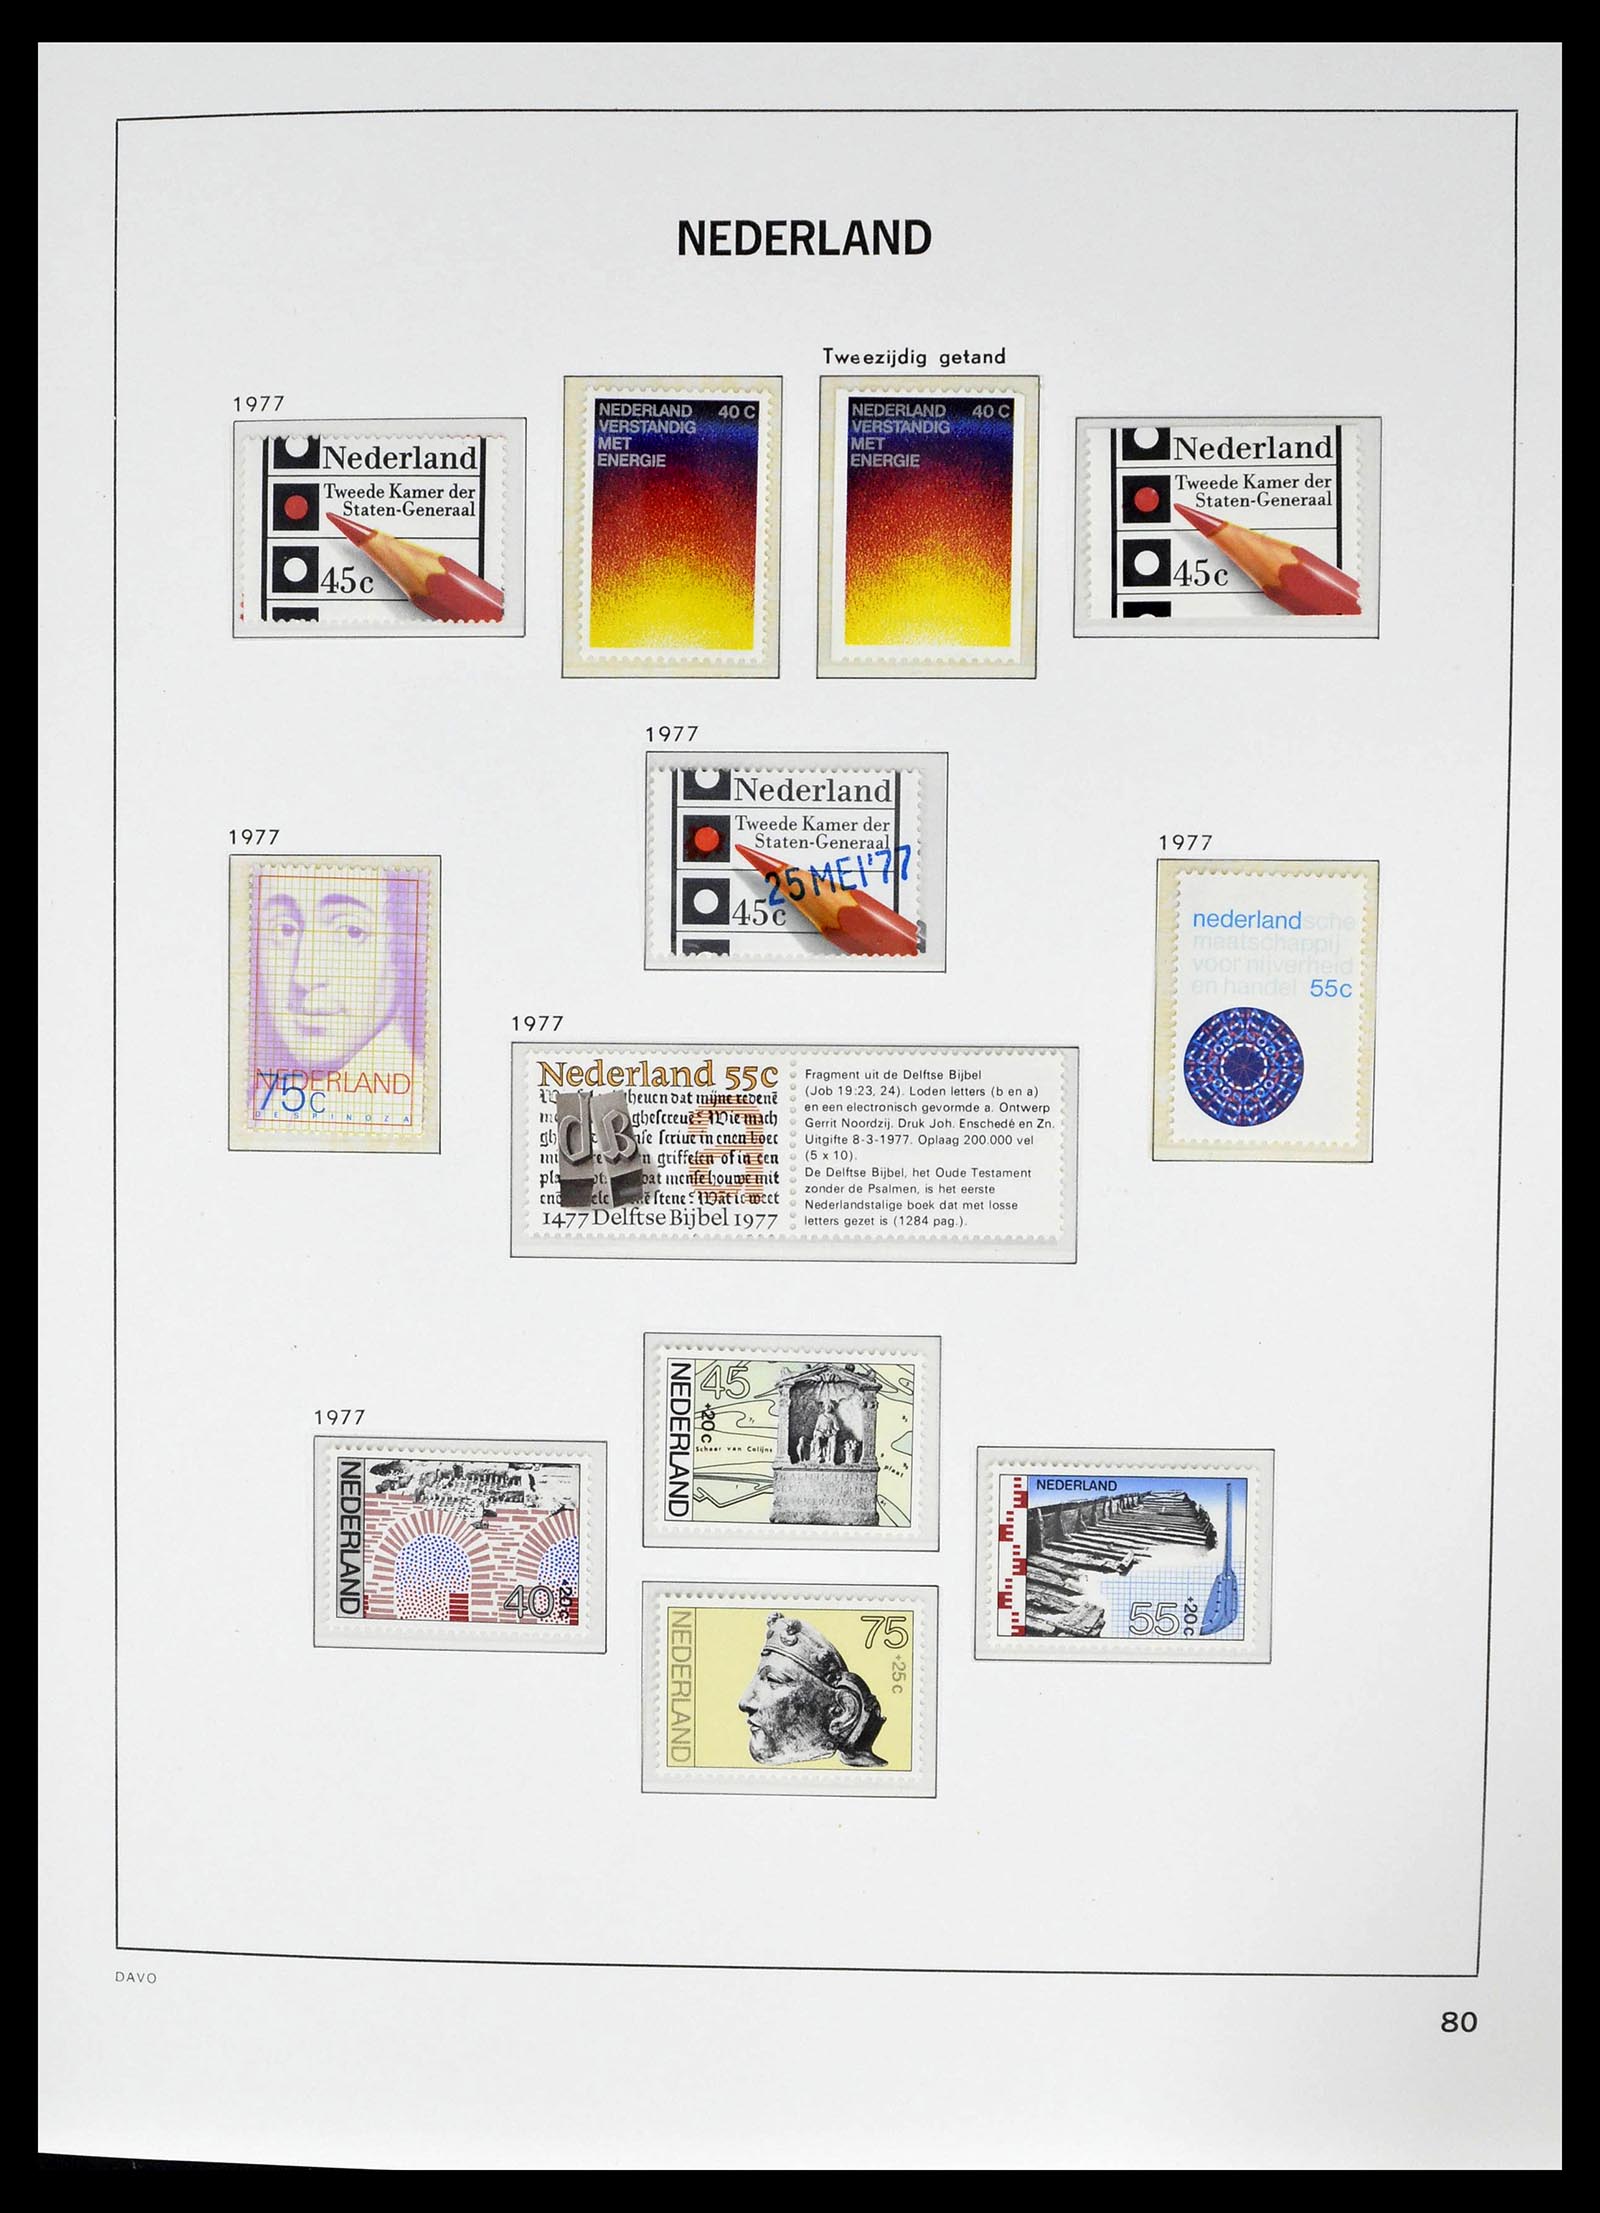 39136 0007 - Stamp collection 39136 Netherlands 1975-2020!